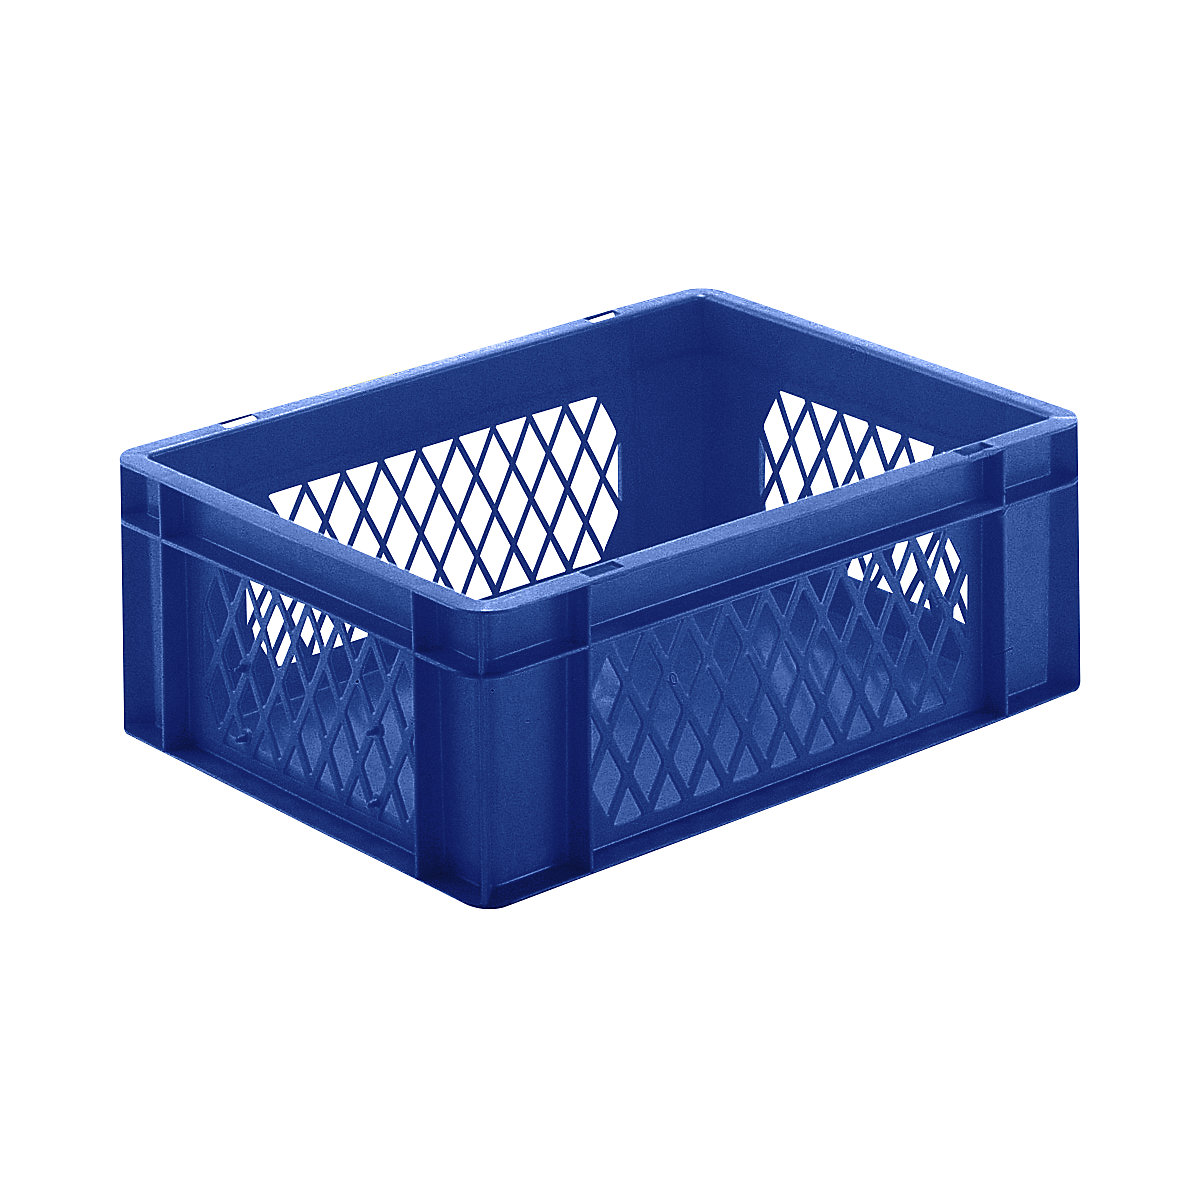 Euro stacking container, perforated walls, closed base, LxWxH 400 x 300 x 145 mm, blue, pack of 5-8